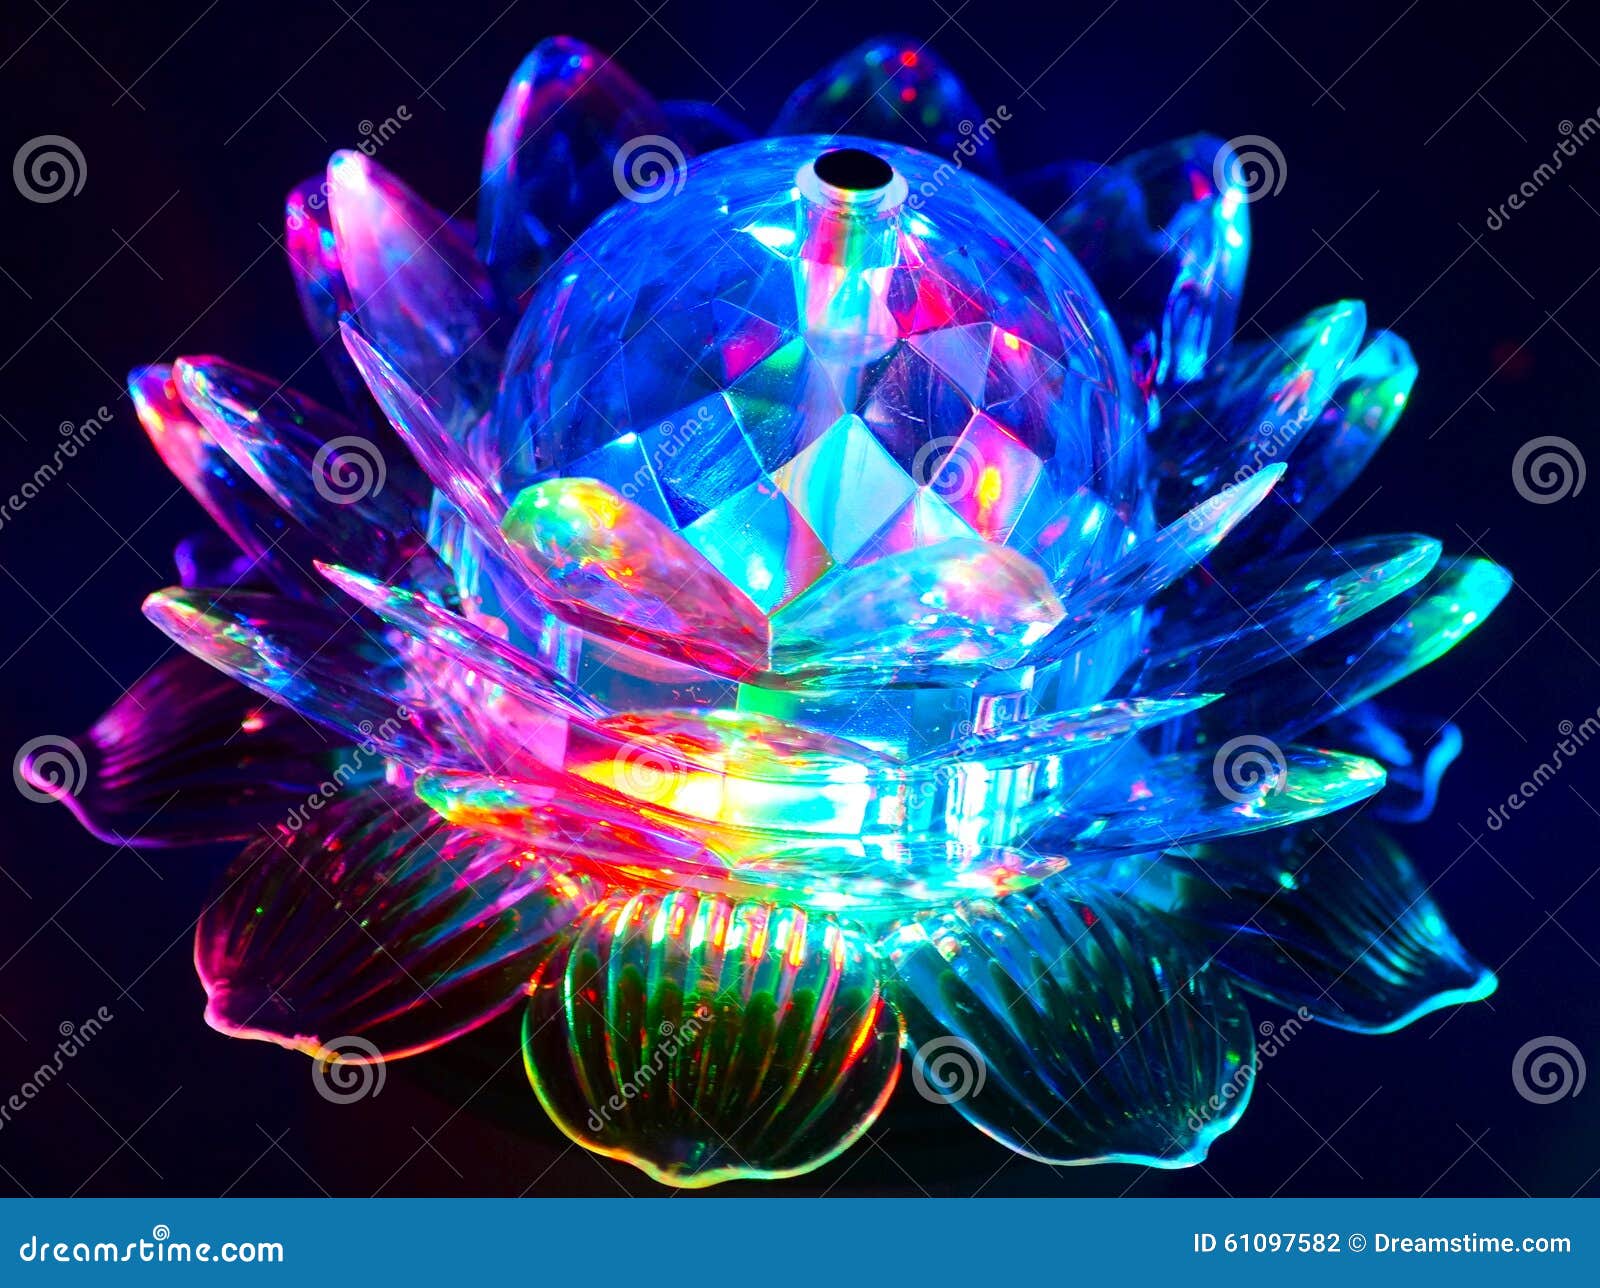 Prismatic Crystal Flower Stock Photo Image Of Colors 61097582